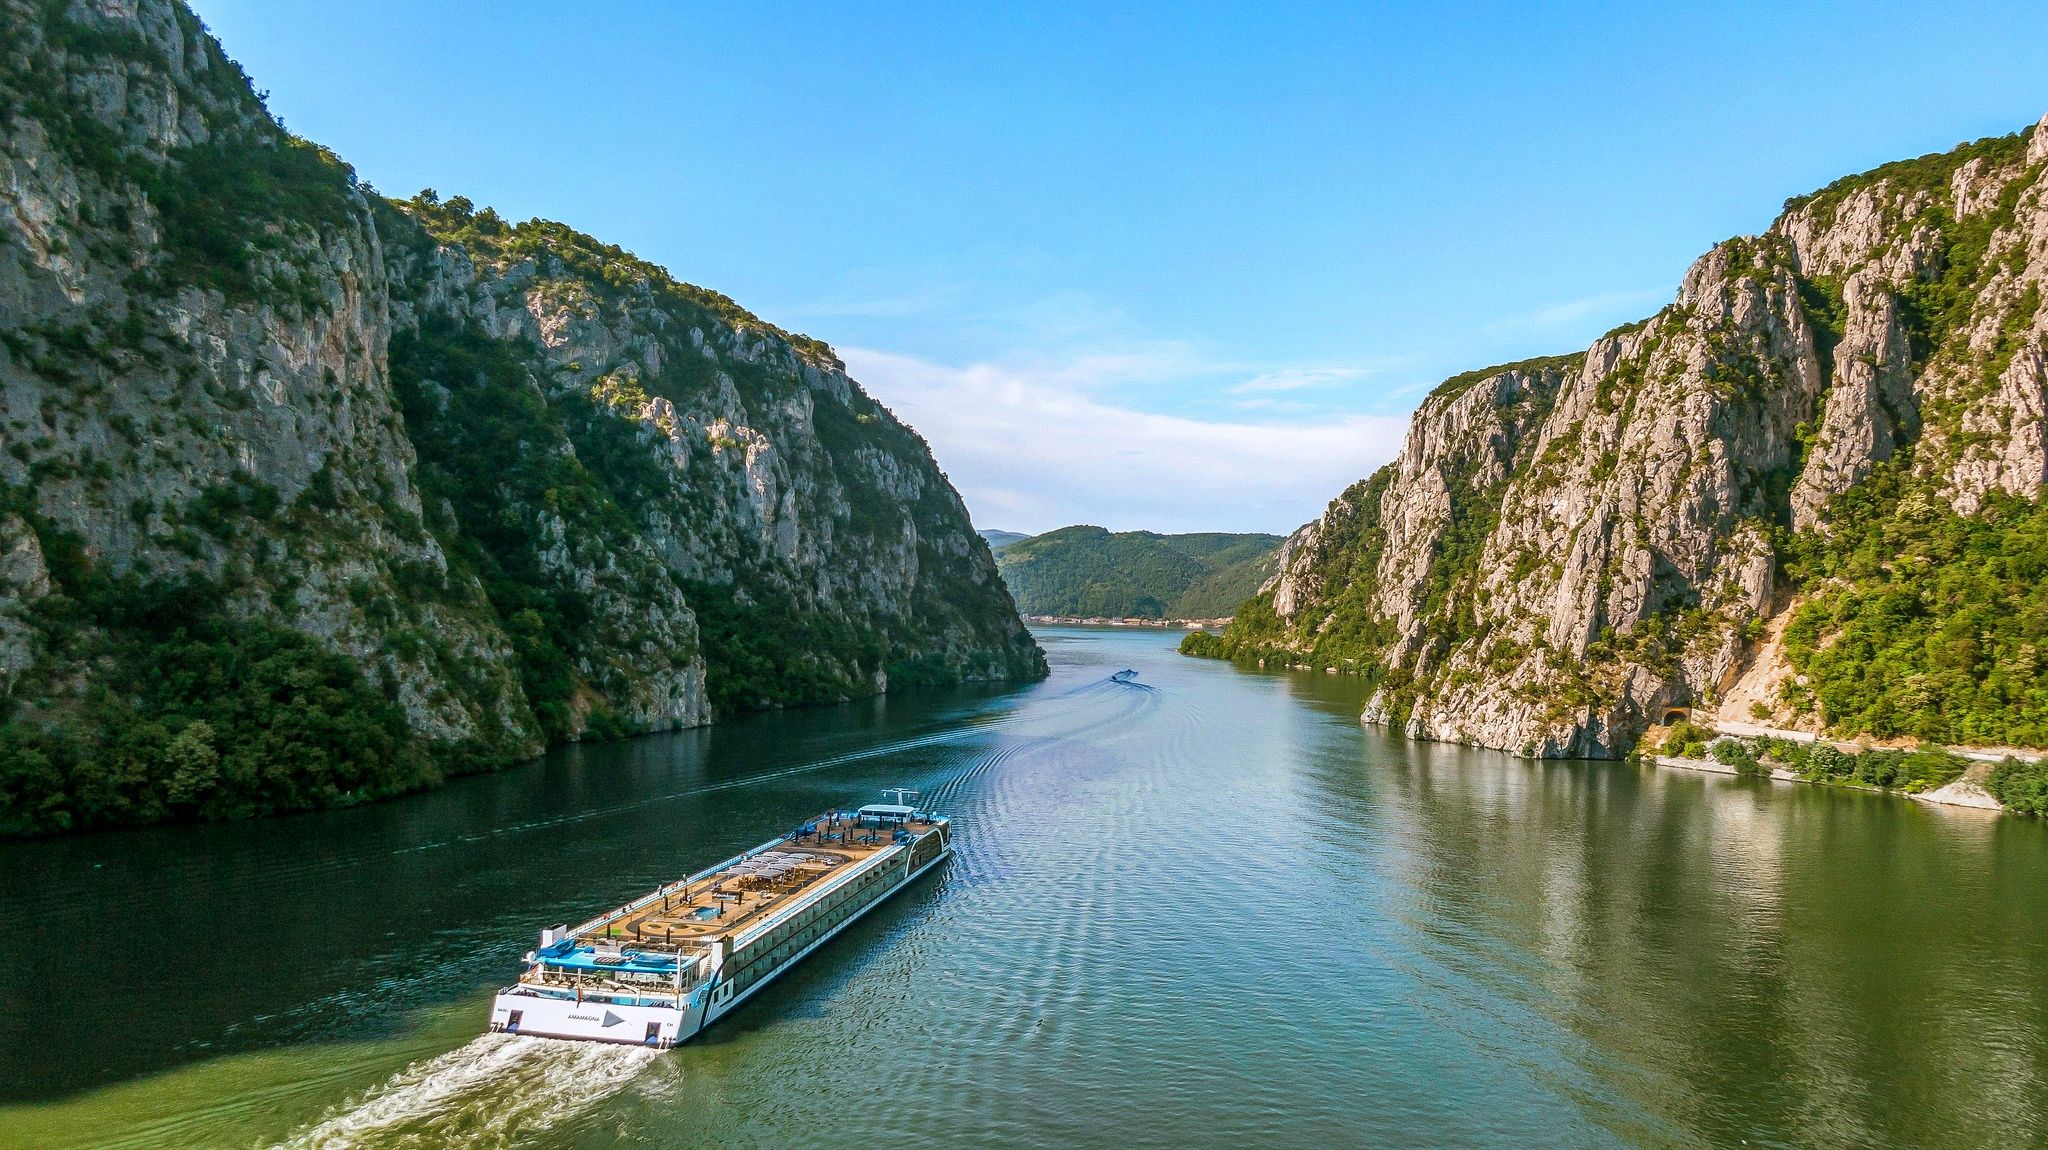 AmaWaterways waives single supplements on certain river cruises for solo sailors